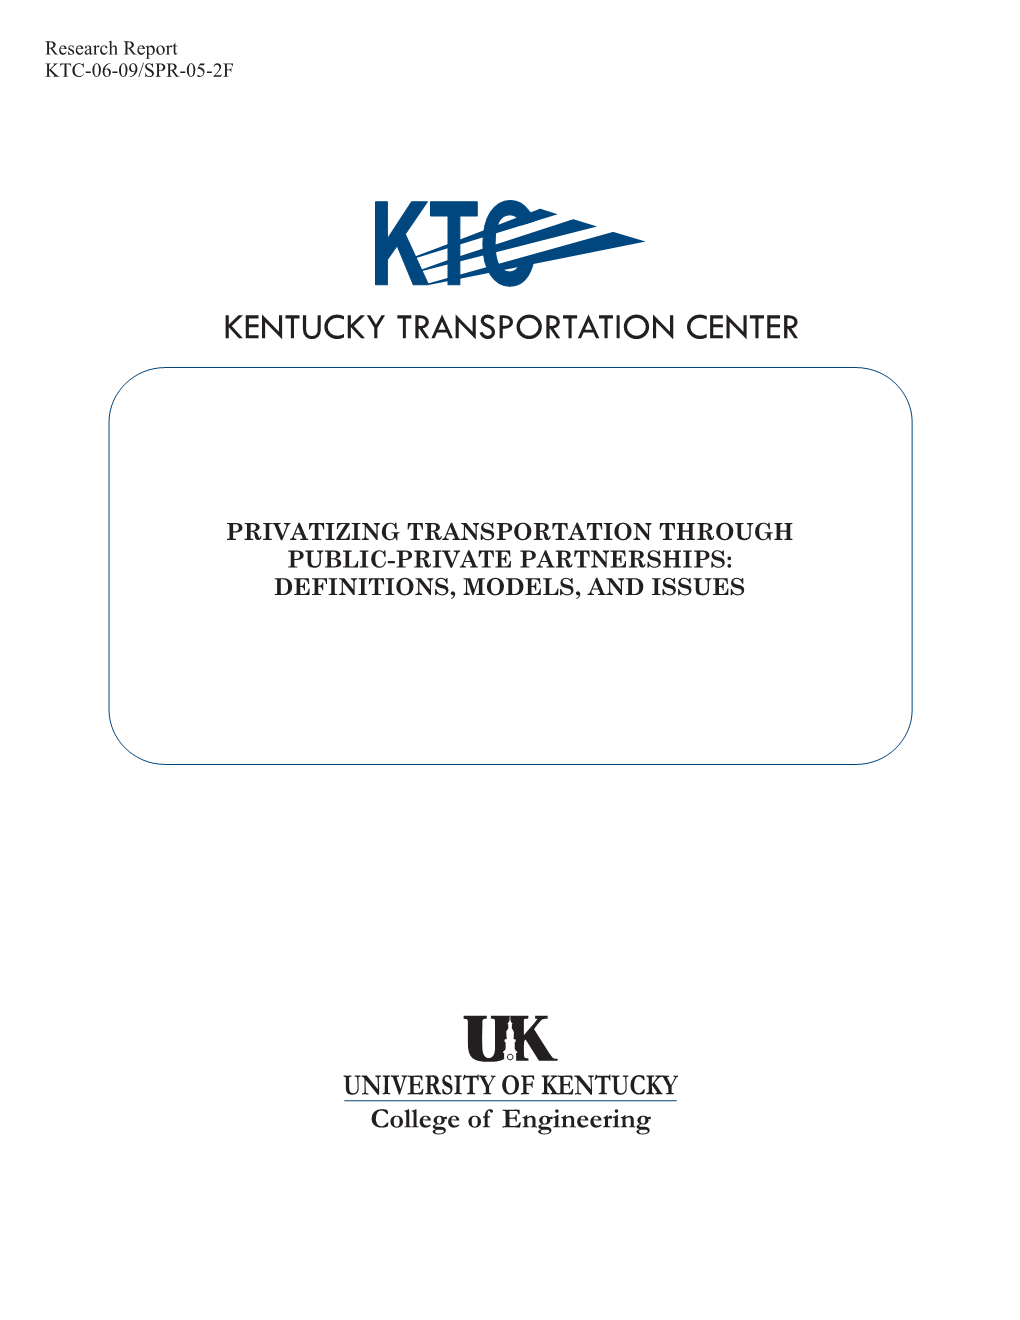 Privatizing Transportation Through Public-Private Partnerships: Definitions, Model, and Issues